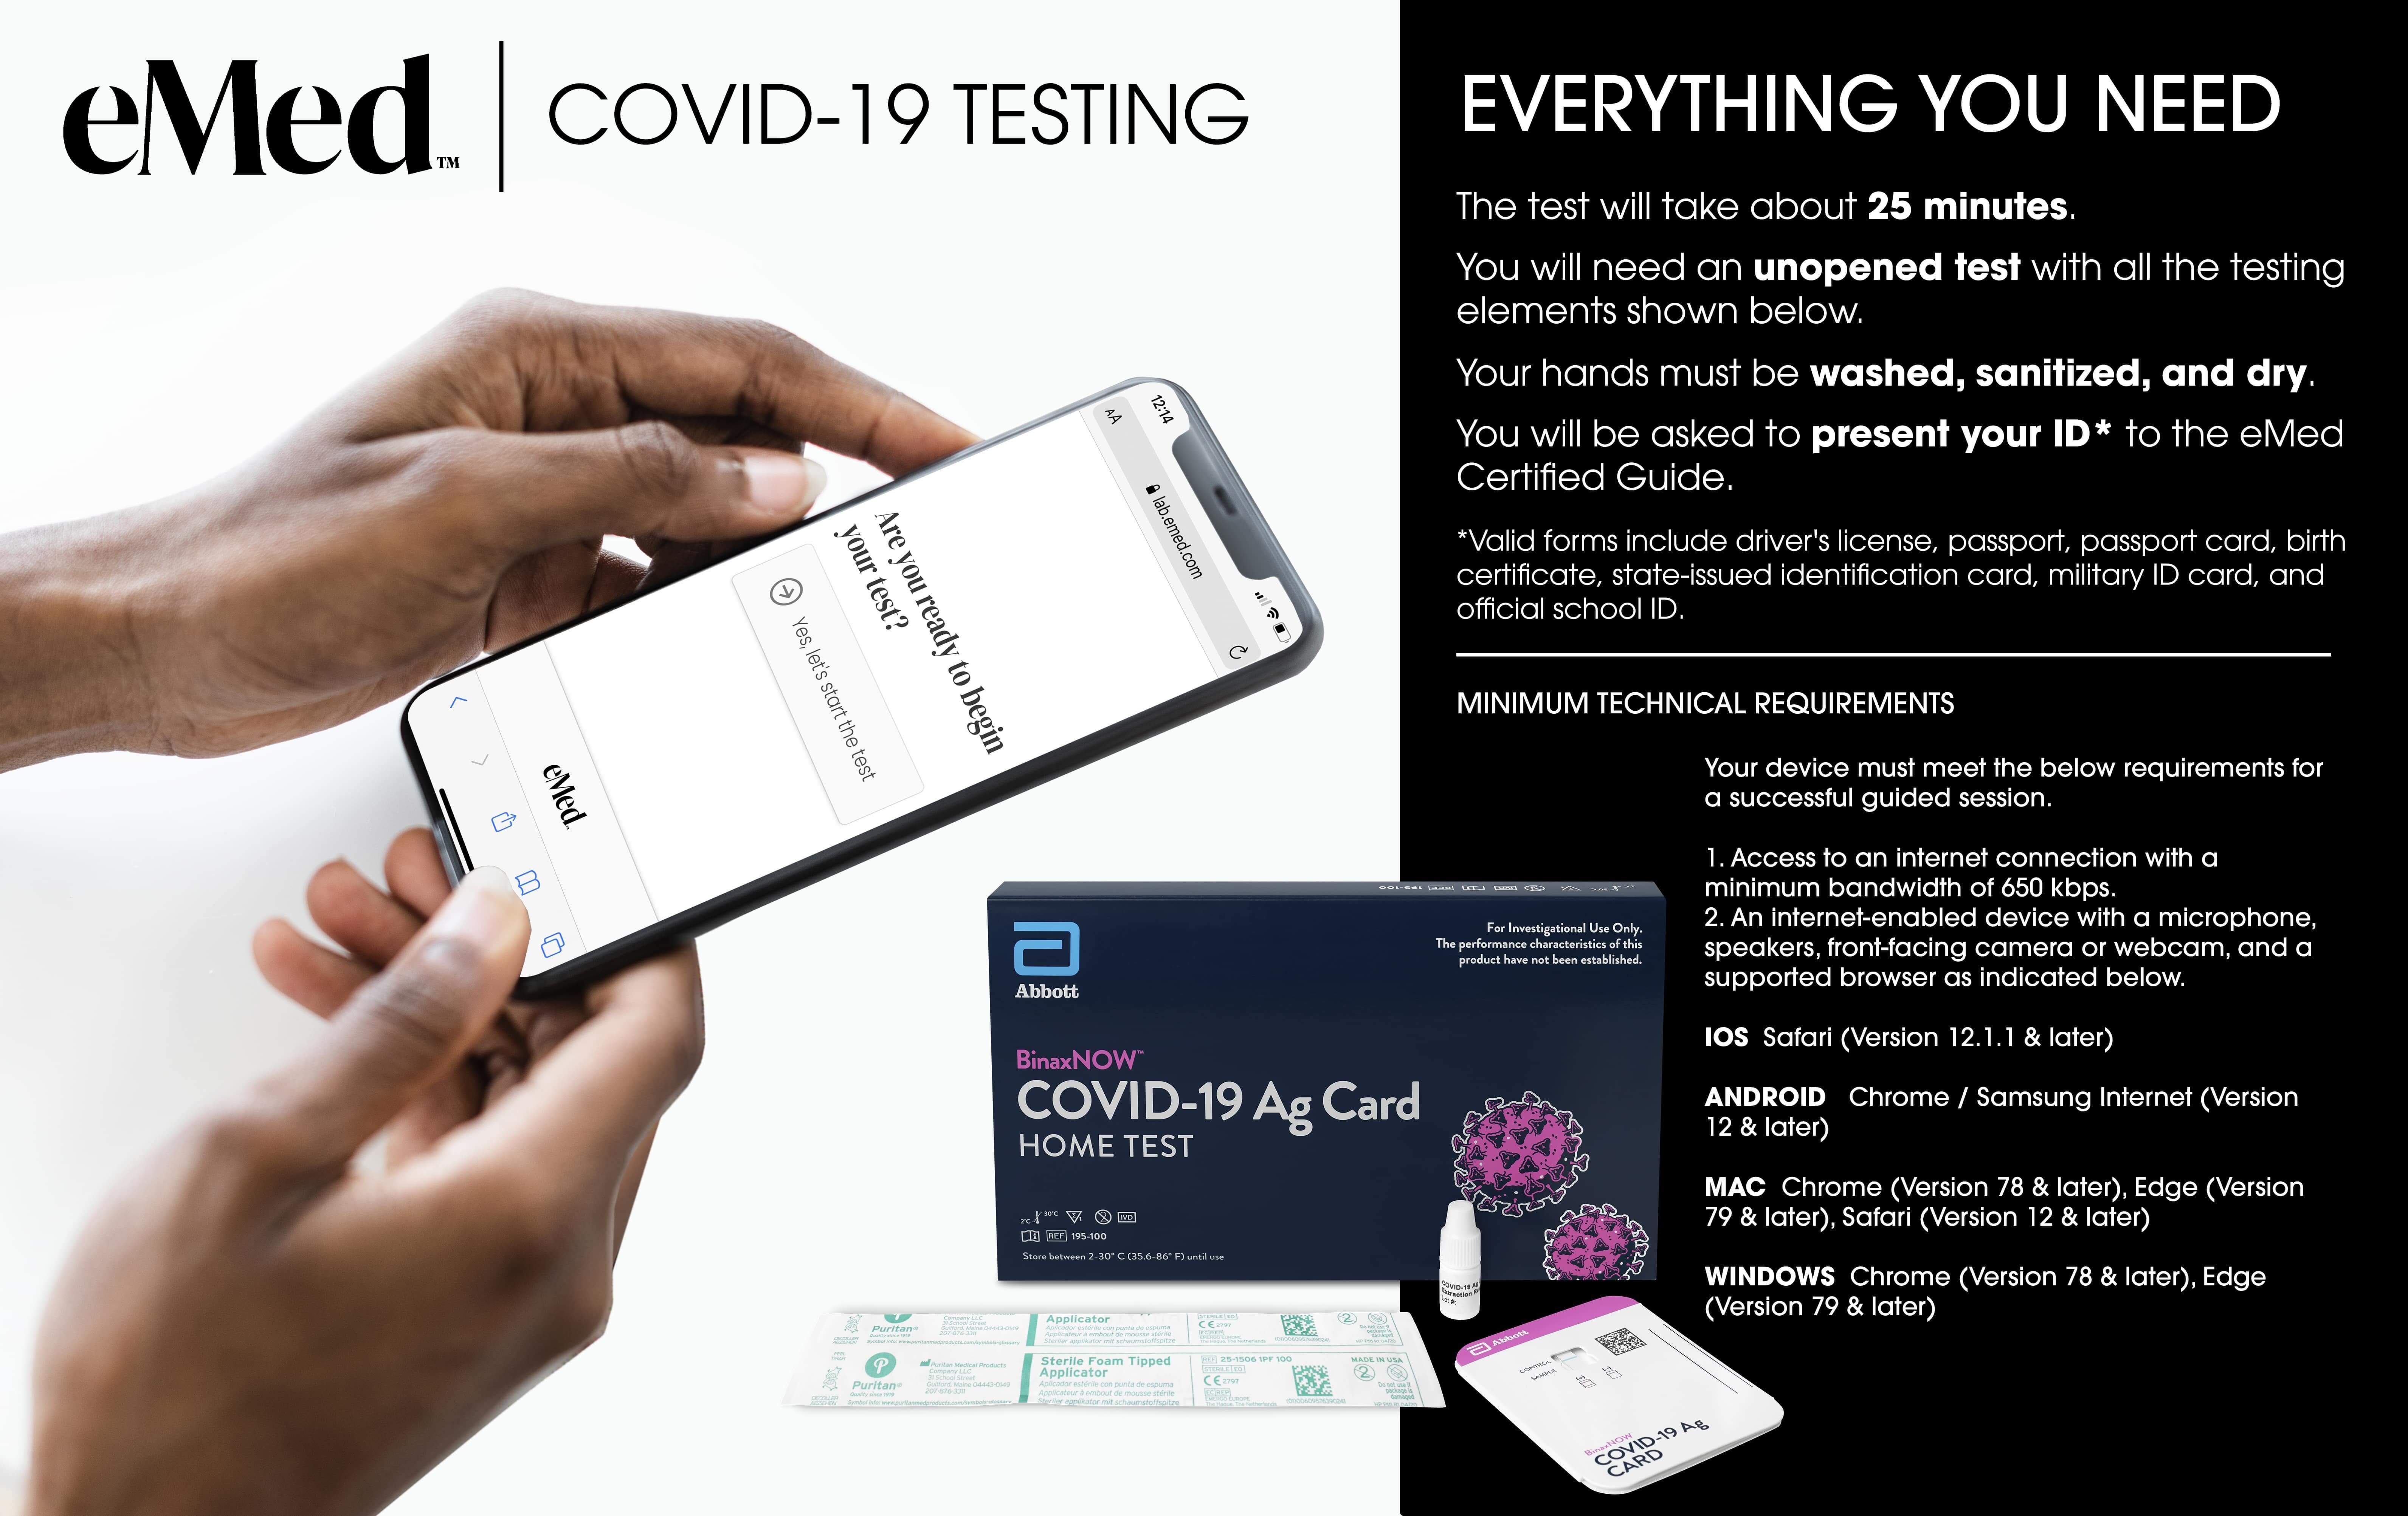 DISCAbbott BinaxNOW™ COVID-19 Antigen Card Home Test with eMed Telehealth Services - 1 Pack for Royal Caribbean